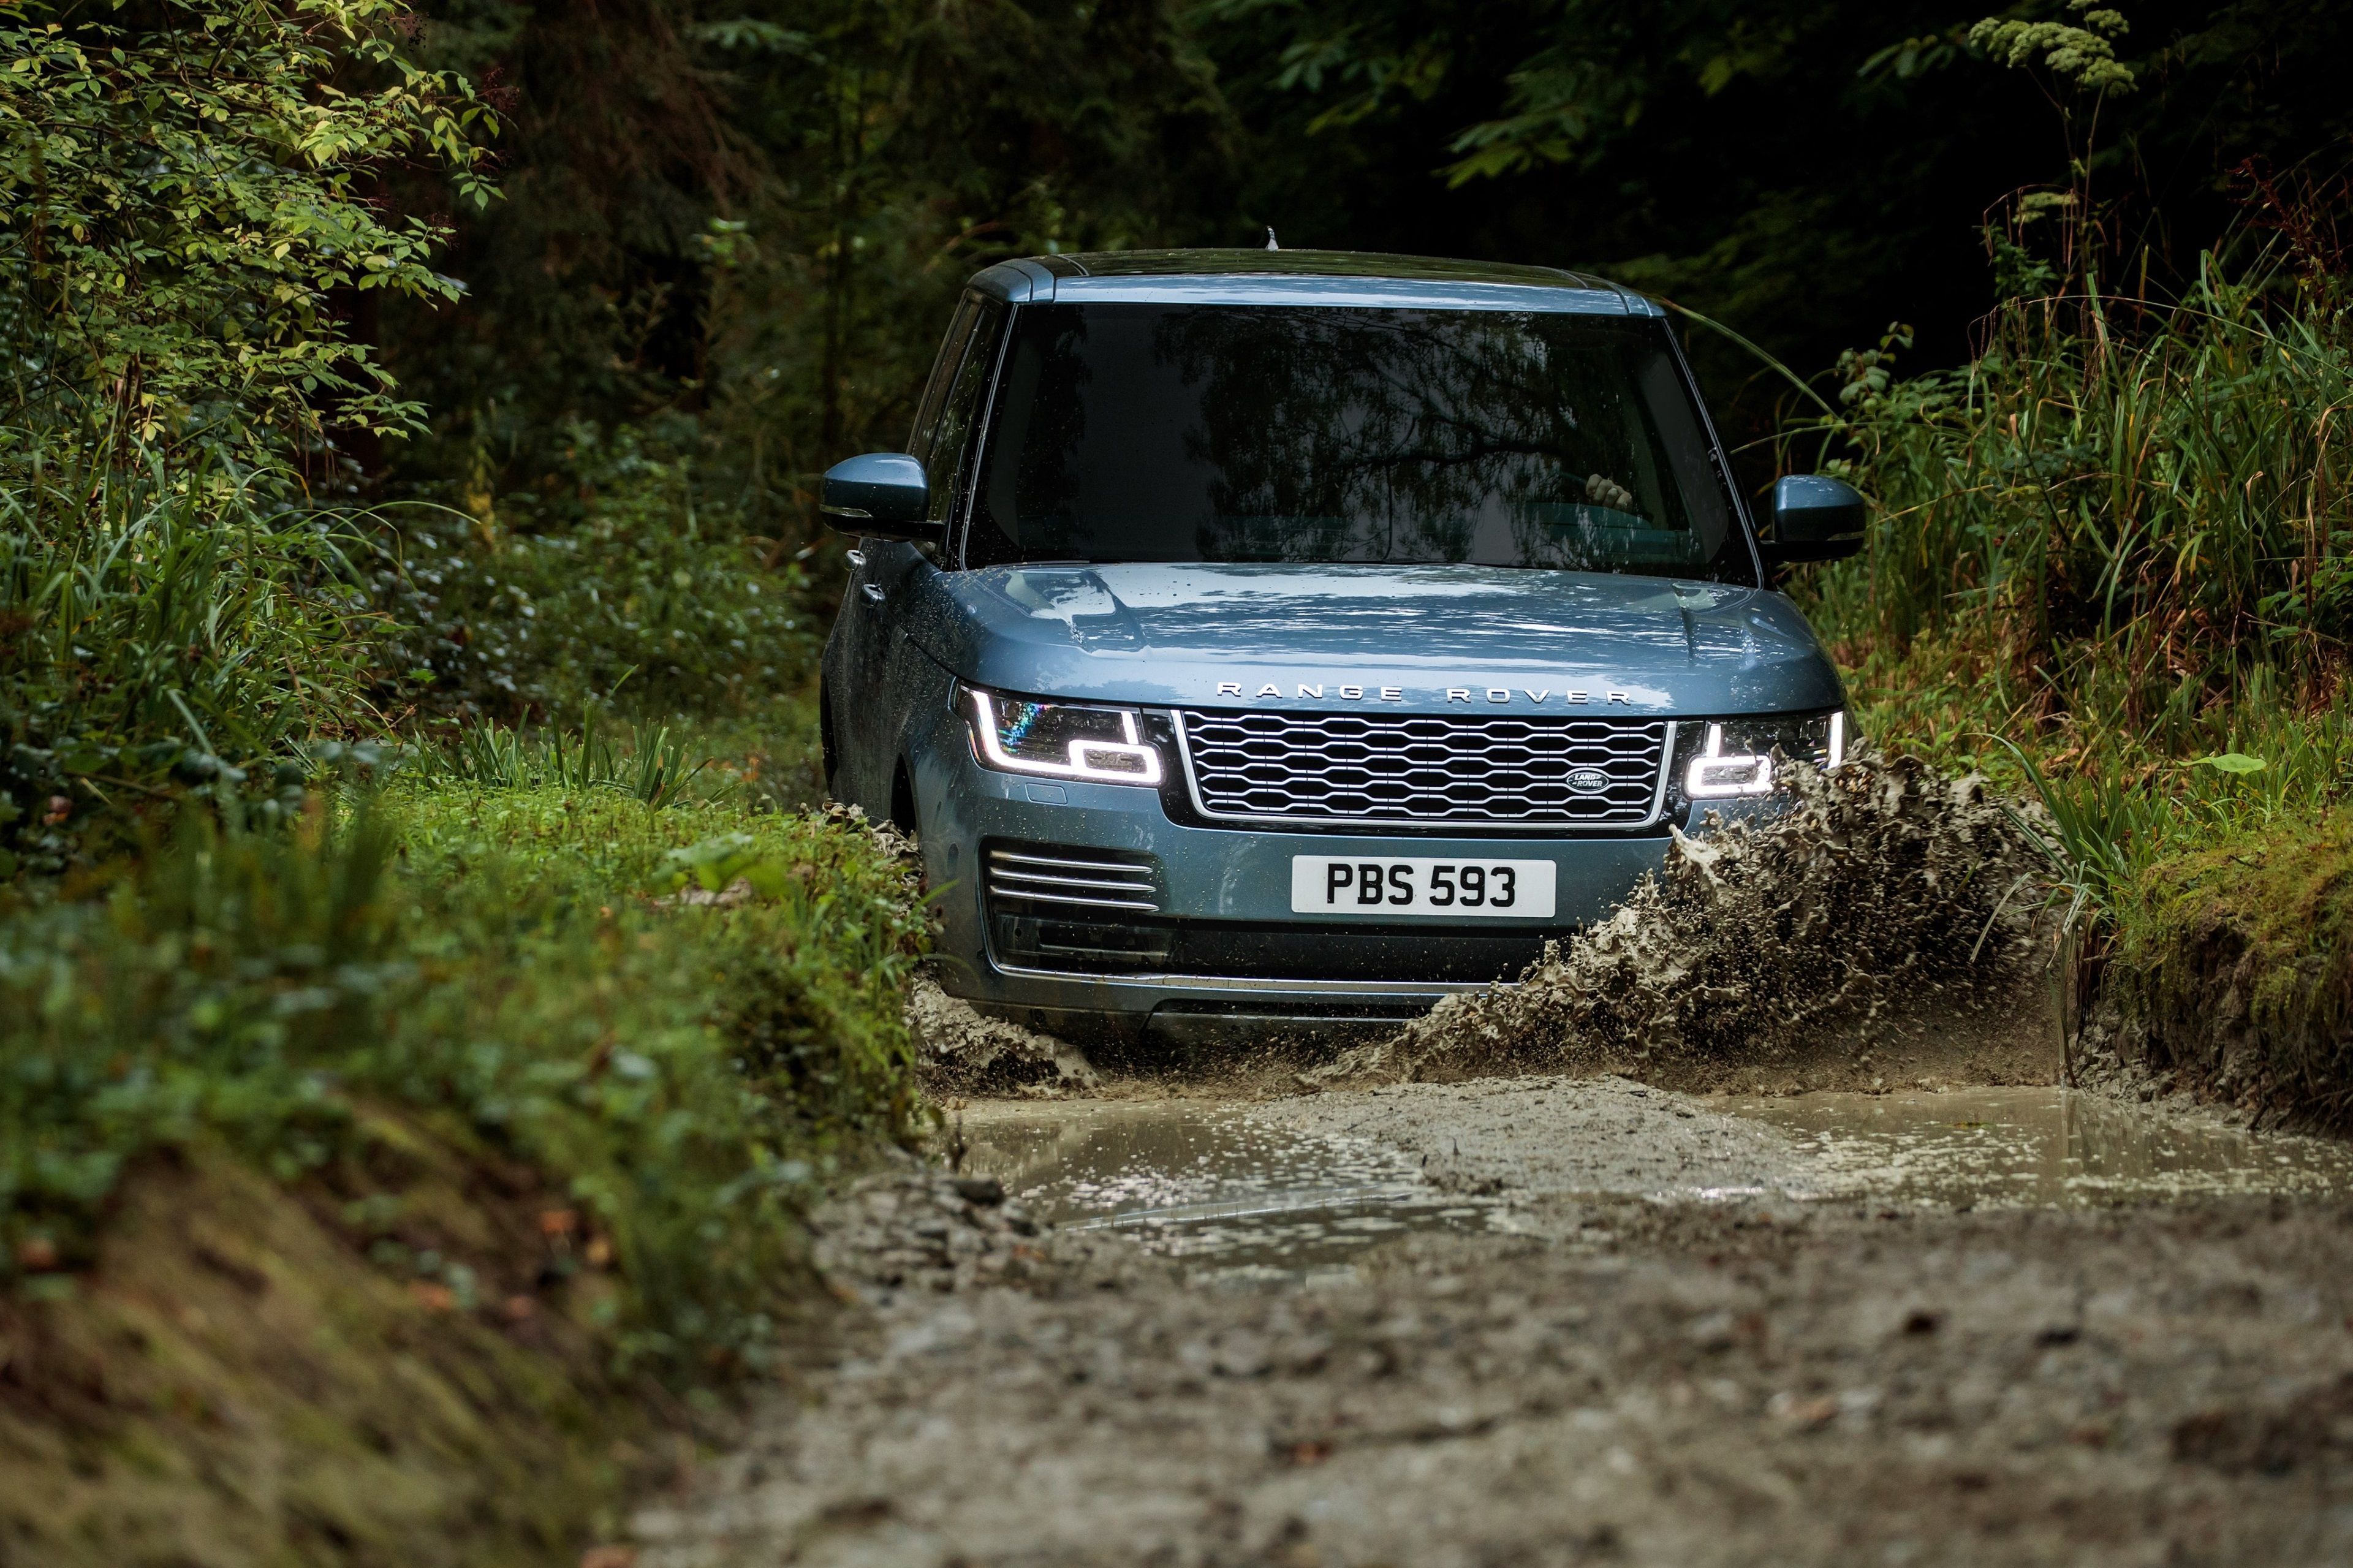 range rover autobiography 4k HD image for wallpaper. The new range rover, Range rover, Land rover